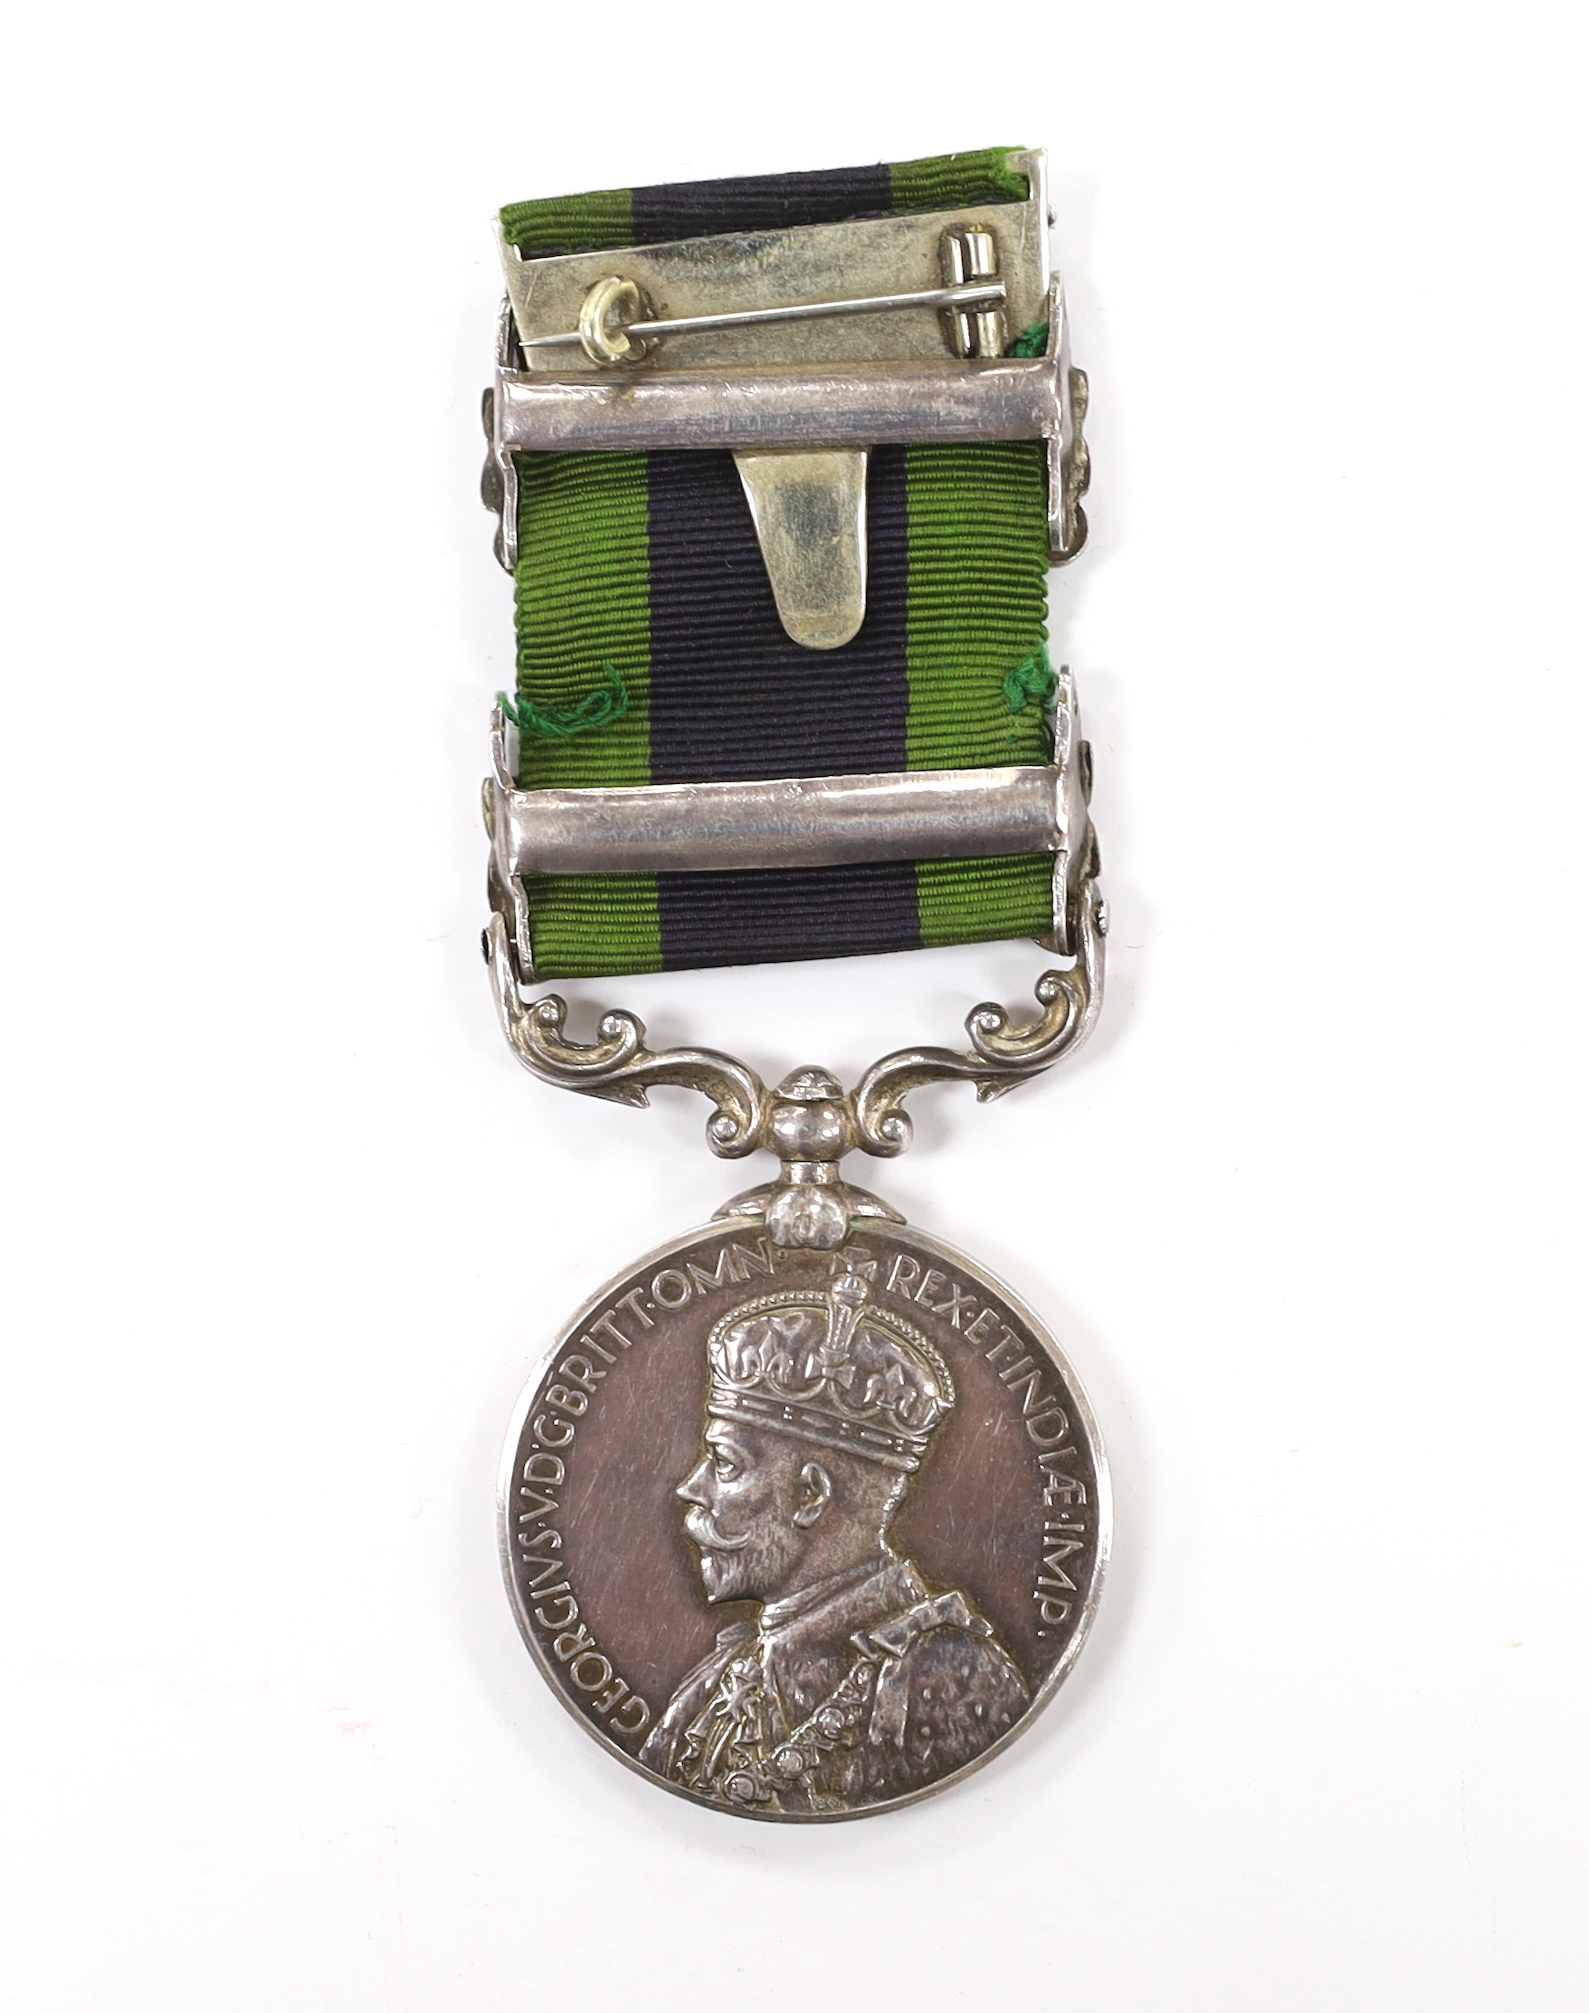 A George V India medal to L.A.C. S.W. Lipscomb R.A.F. with two bars for North West Frontier 1930-31 and Mohmand 1933